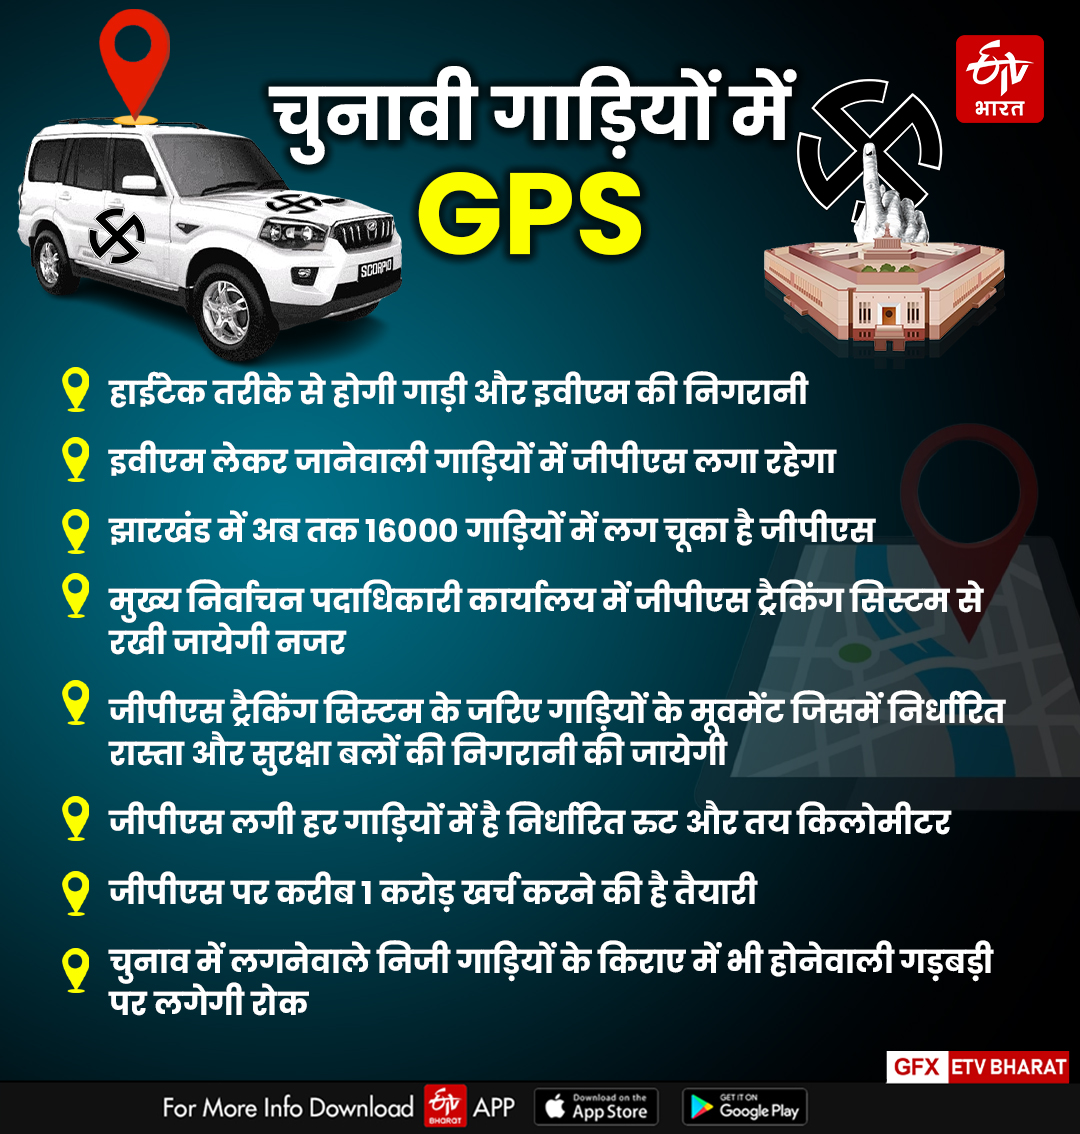 GPS in election vehicles